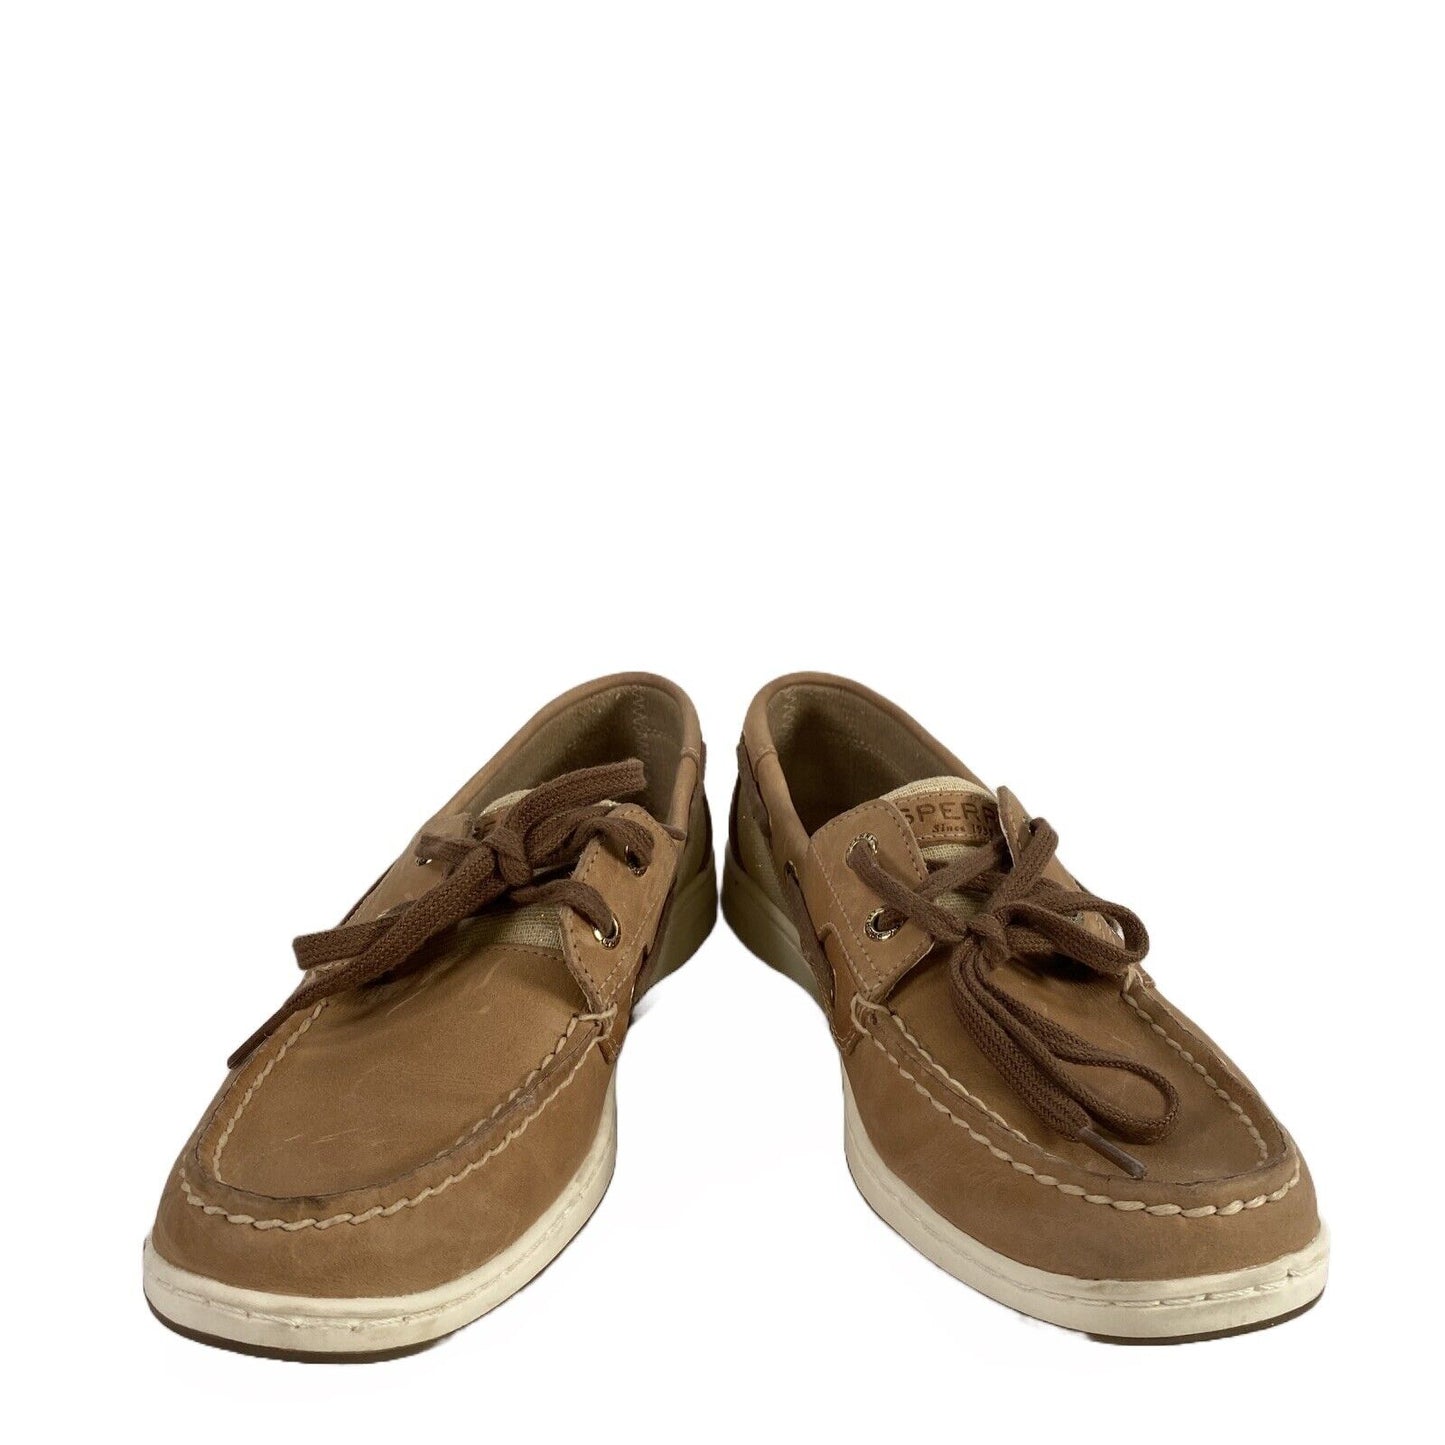 Sperry Women's Beige/Tan Topsider Blue Fish Sparkle Boat Shoes - 8